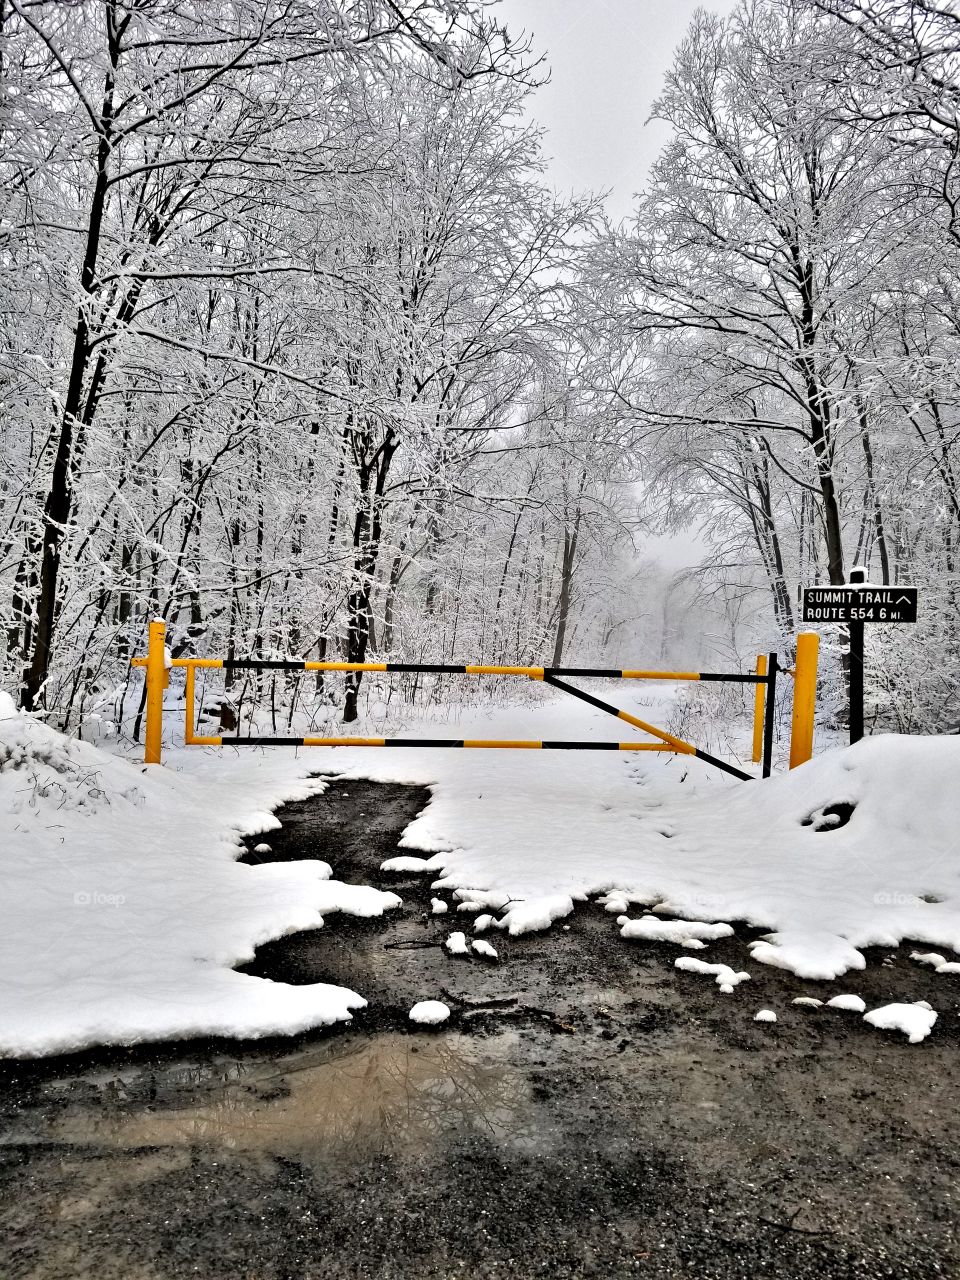 Entrance to winter